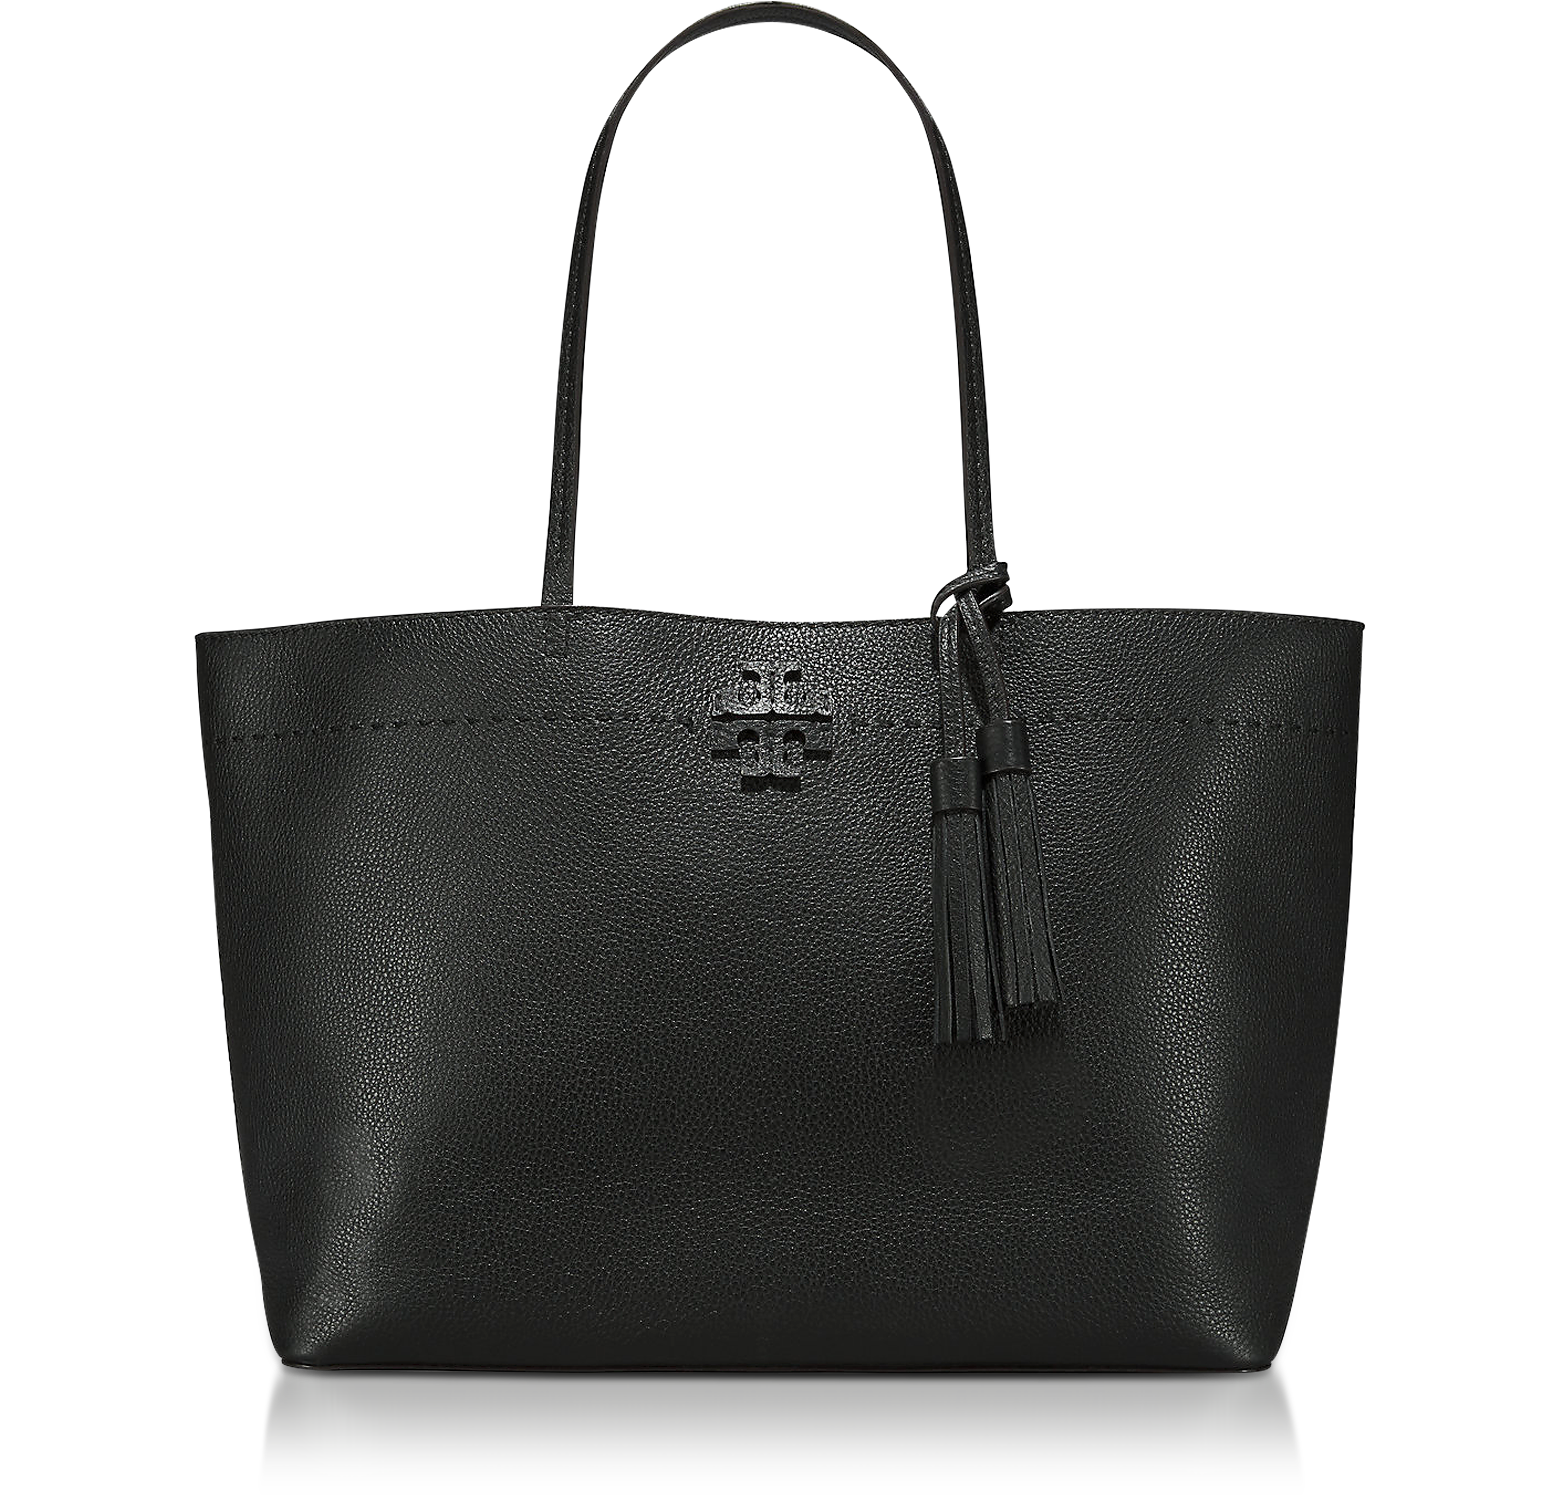 Tory Burch McGraw Black Textured Leather Tote Bag at FORZIERI